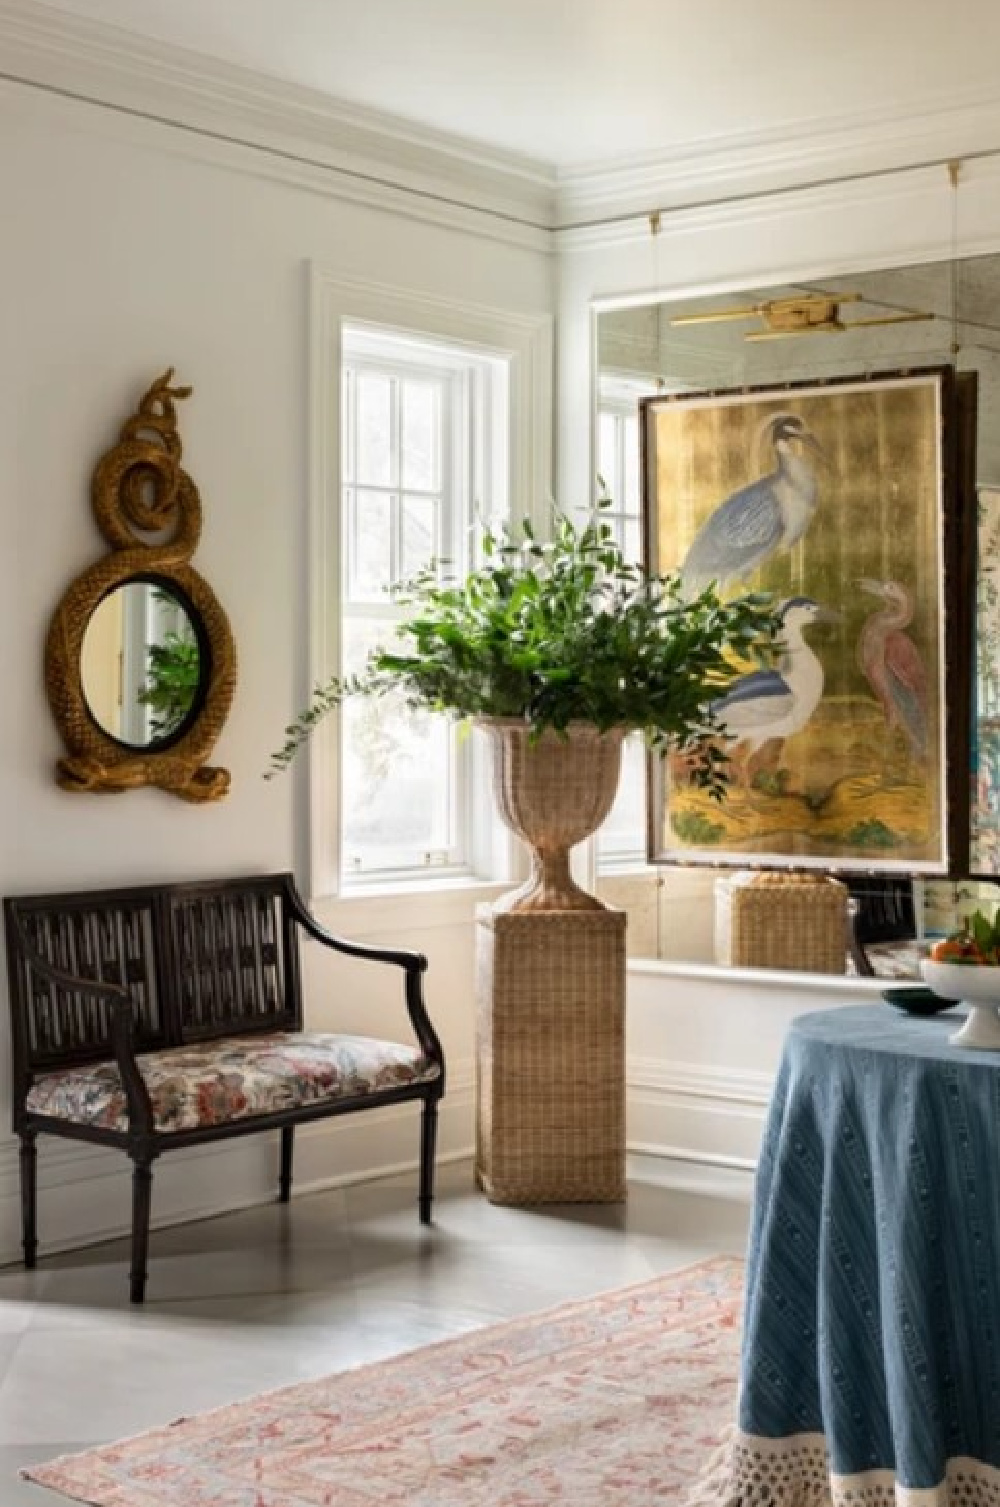 Traditional style in a beautiful Hamptons home with interior design by @m_m_interior_design